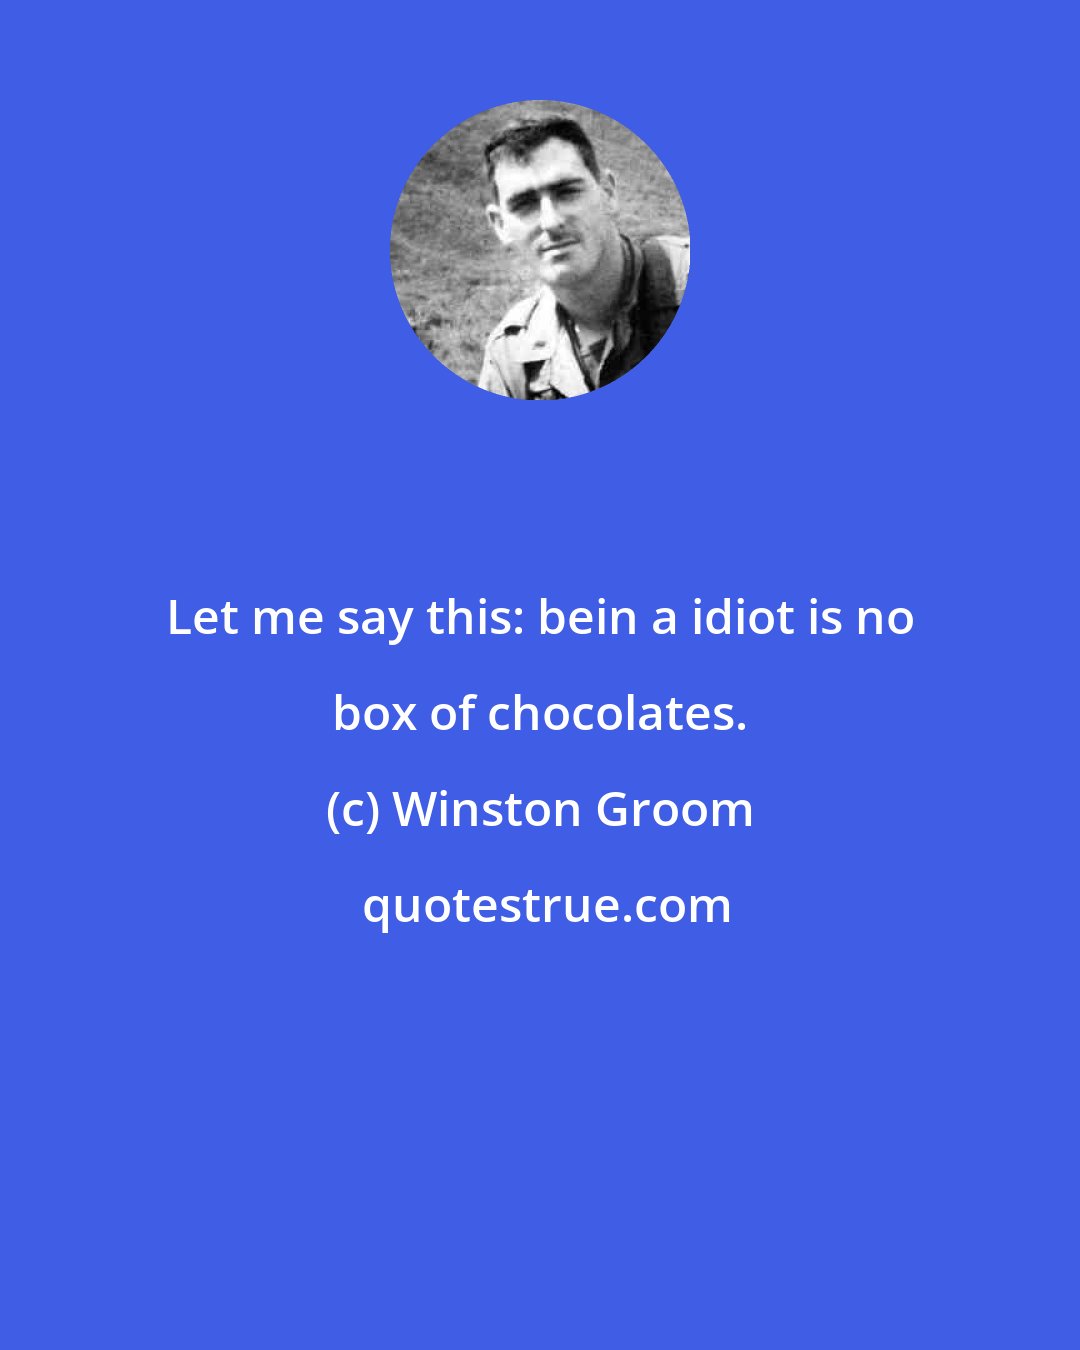 Winston Groom: Let me say this: bein a idiot is no box of chocolates.